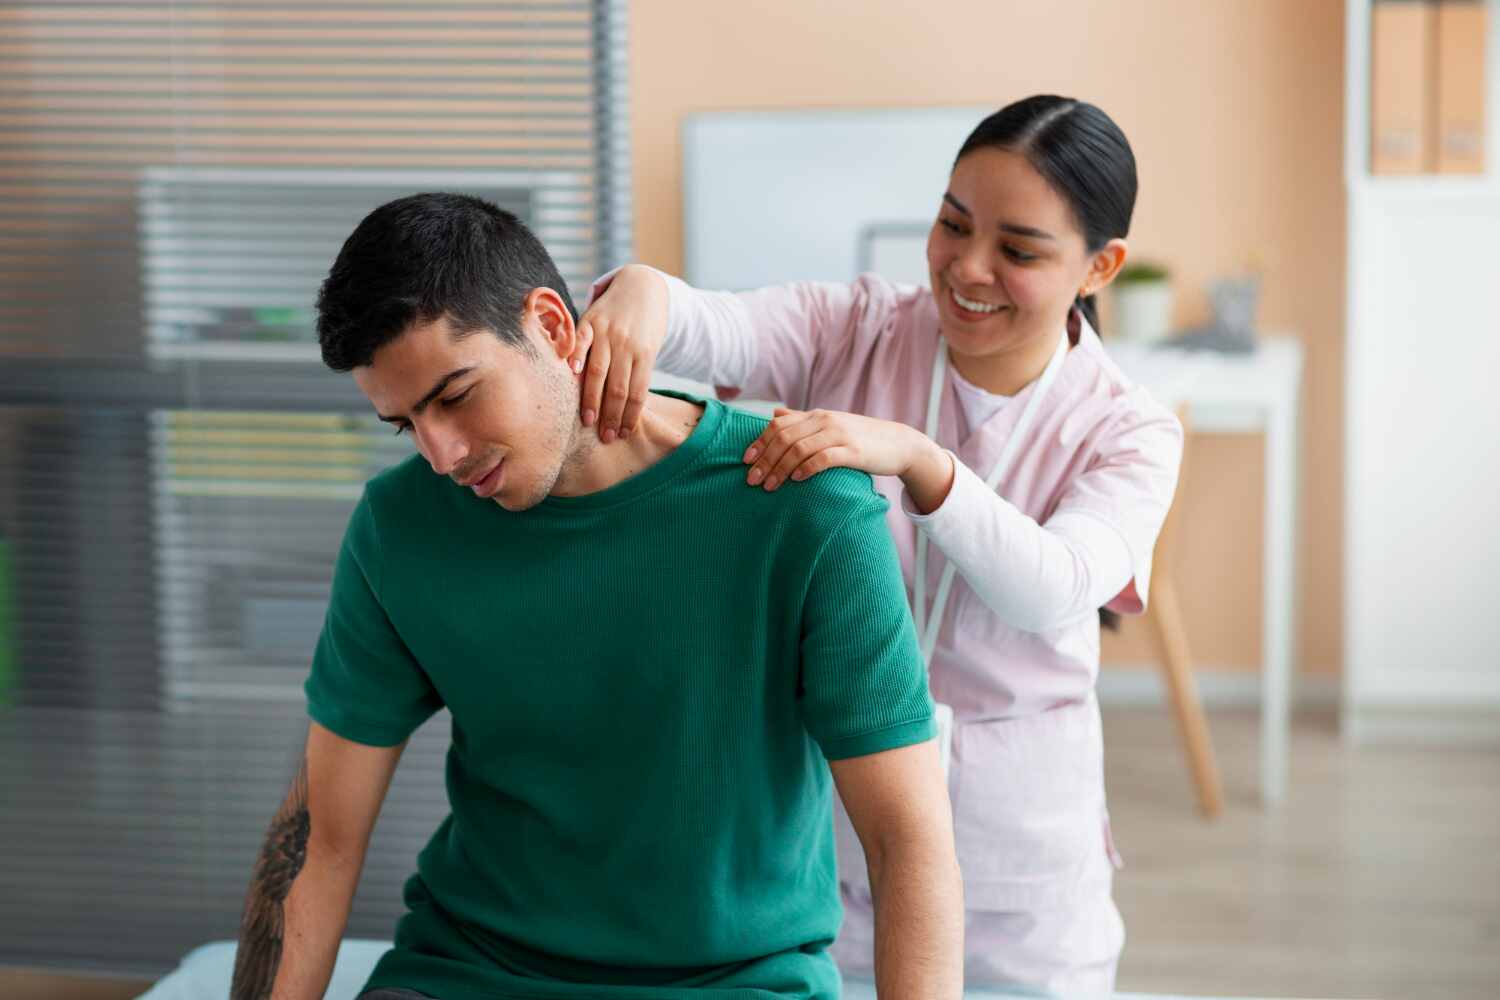 Physiotherapy or occupational therapy - Which one is right for you? 